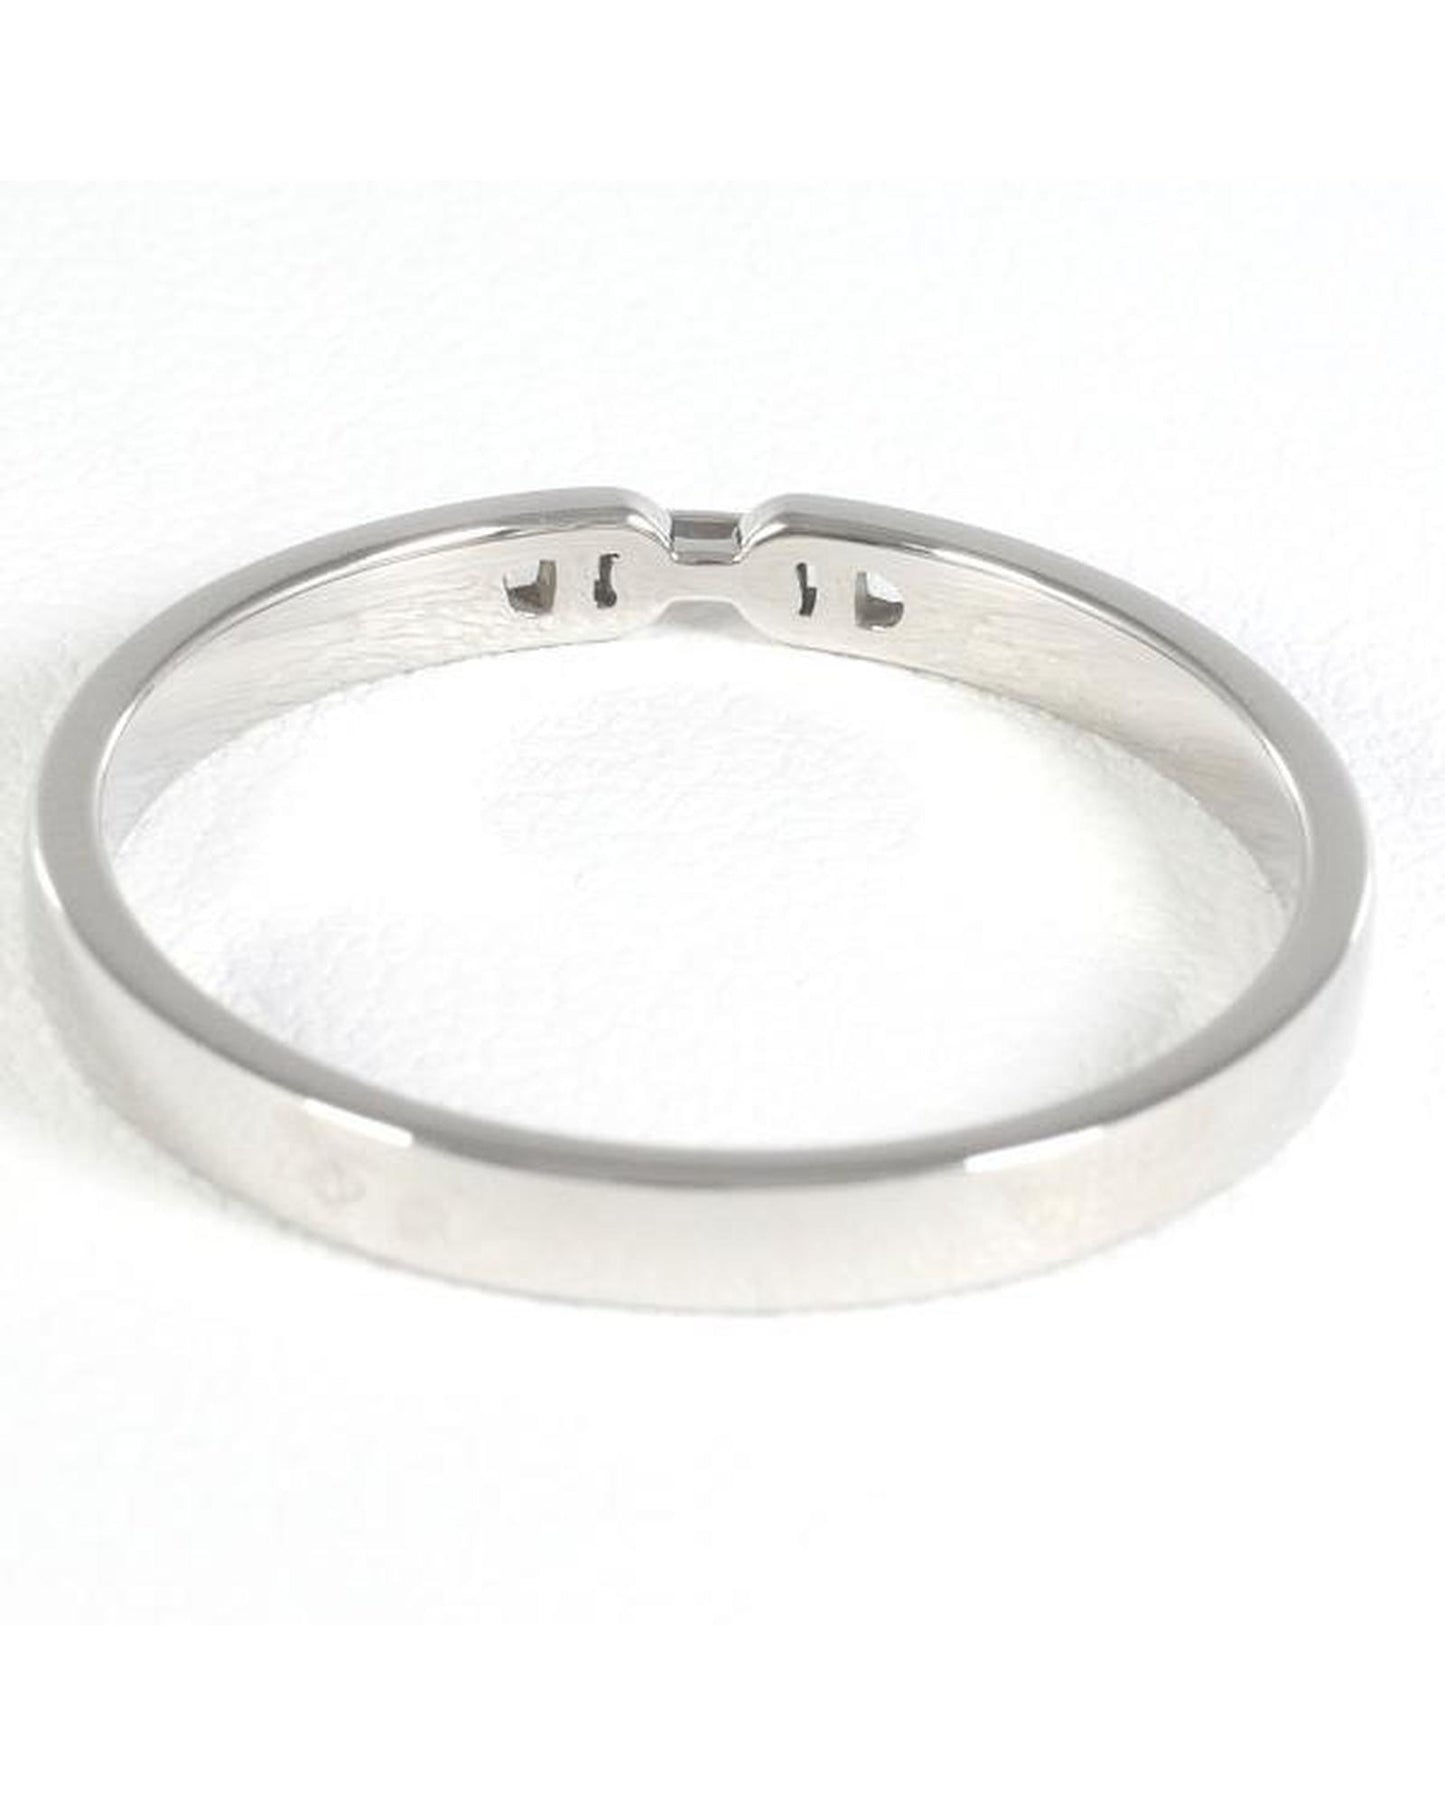 Hermes Men's Platinum Chaine Dancre Wedding Band - A Condition in Silver